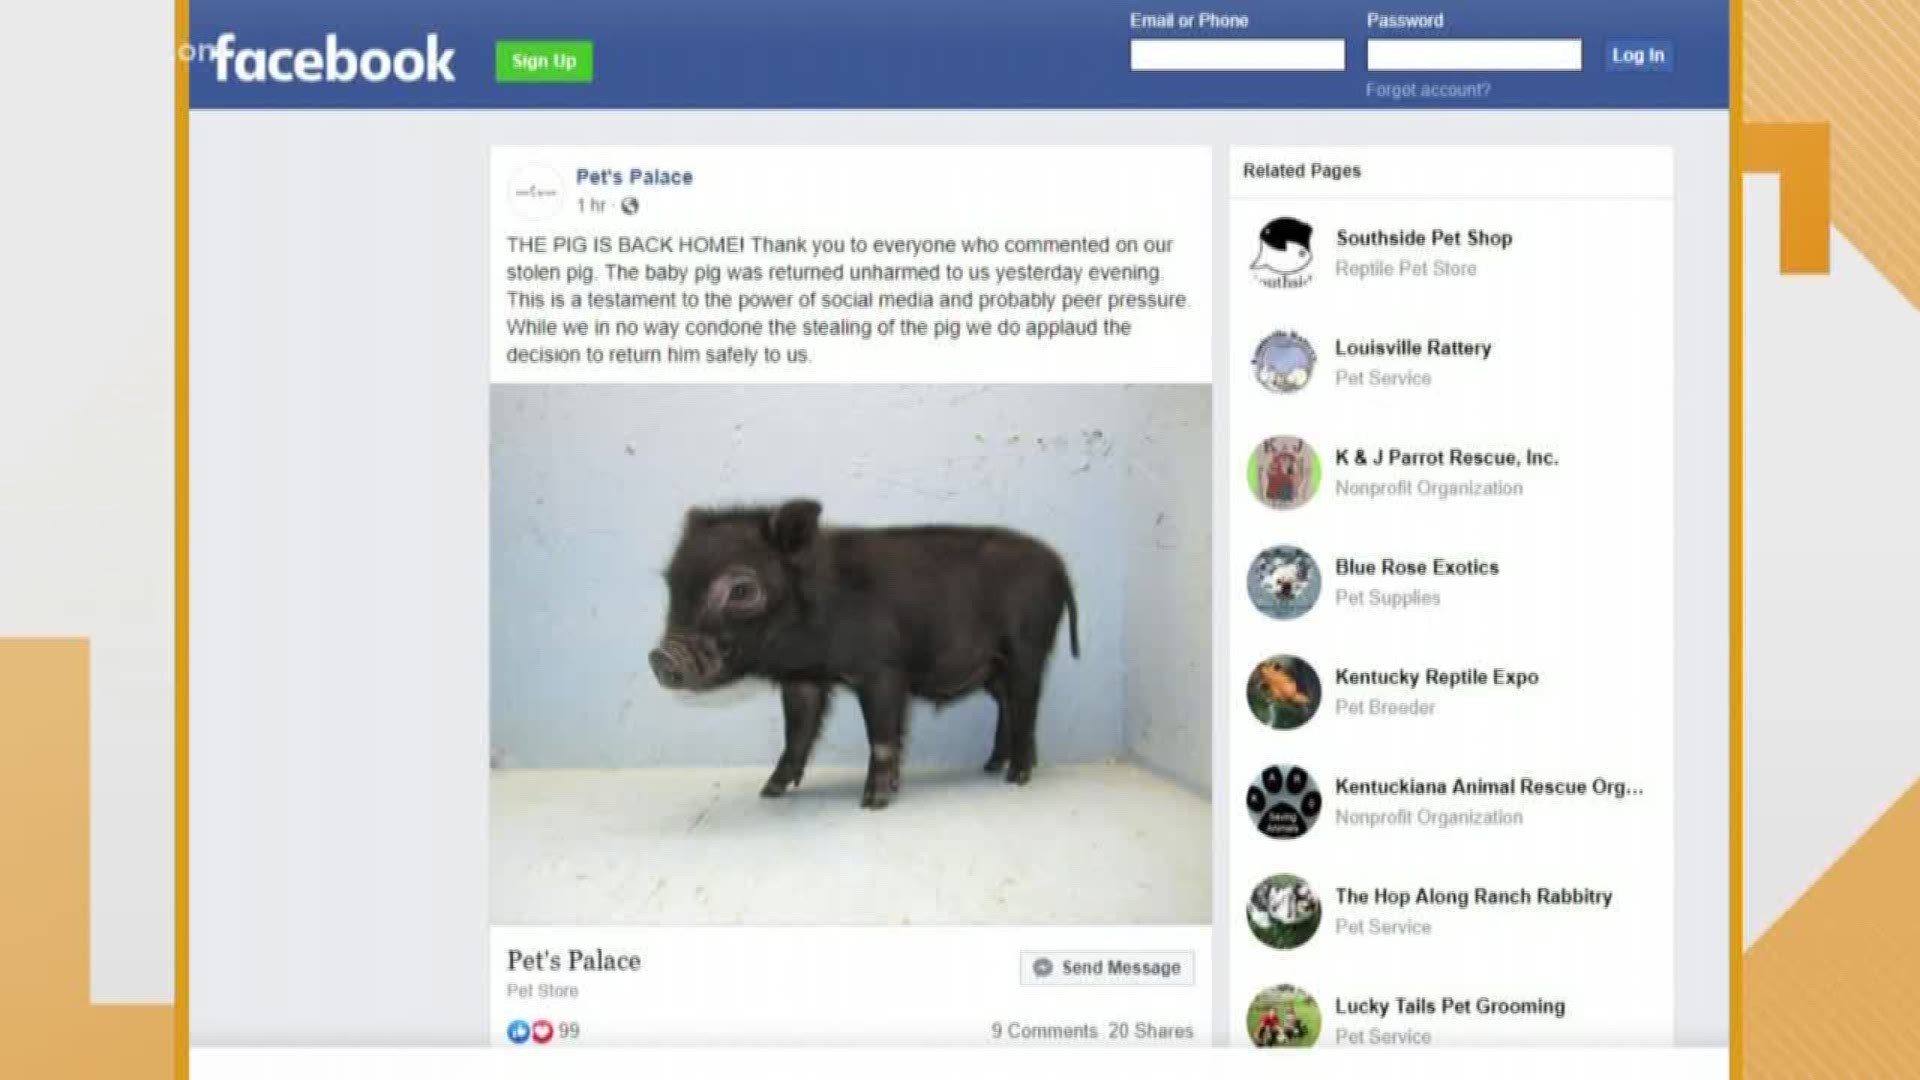 Baby pig has been found.